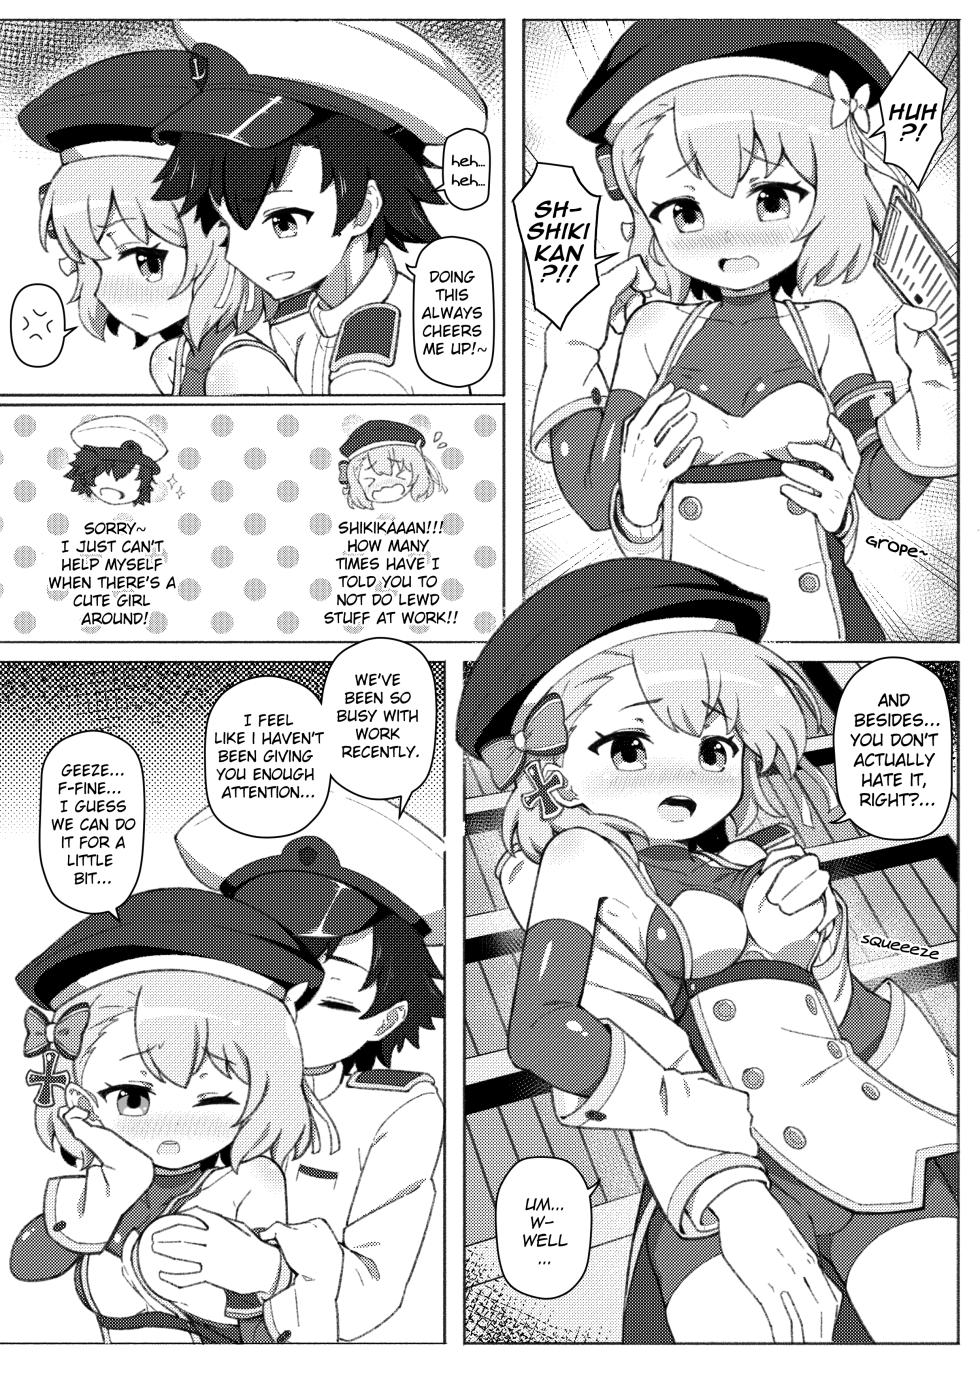 [losingmysauce] Secret Time With Z23 (Azur Lane) [English] [Censored] - Page 3